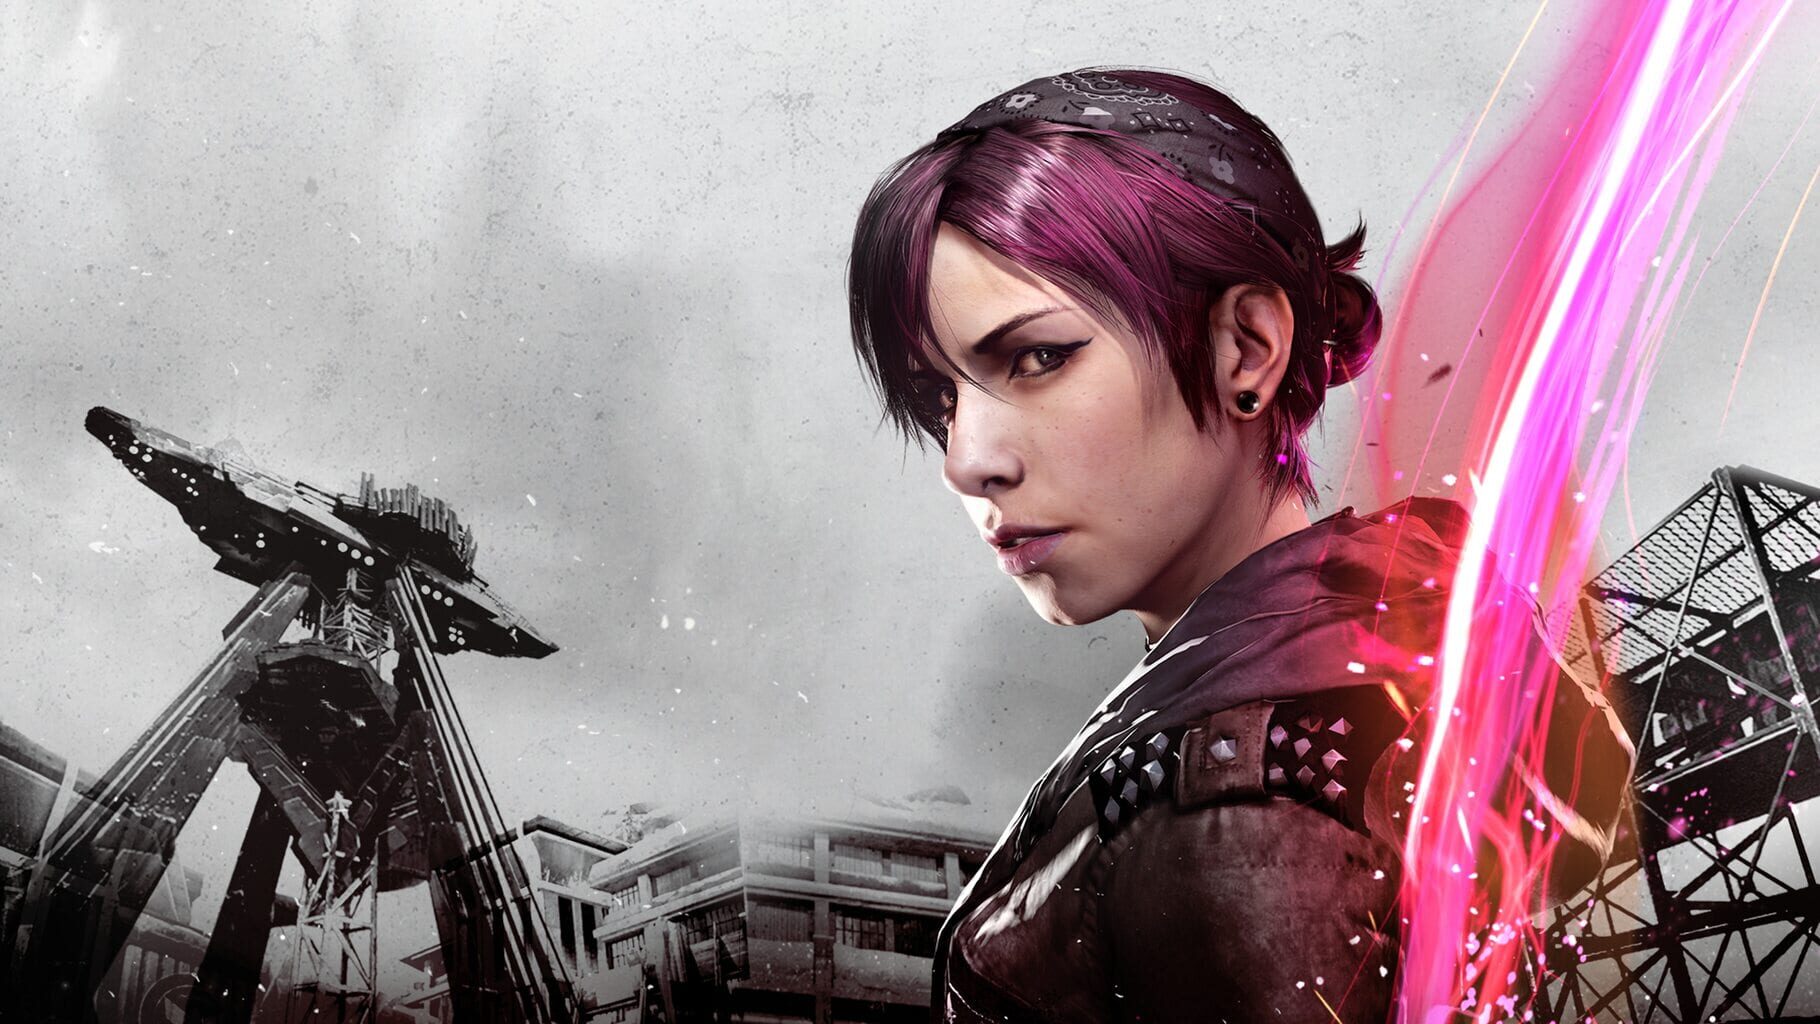 Artwork for Infamous: First Light